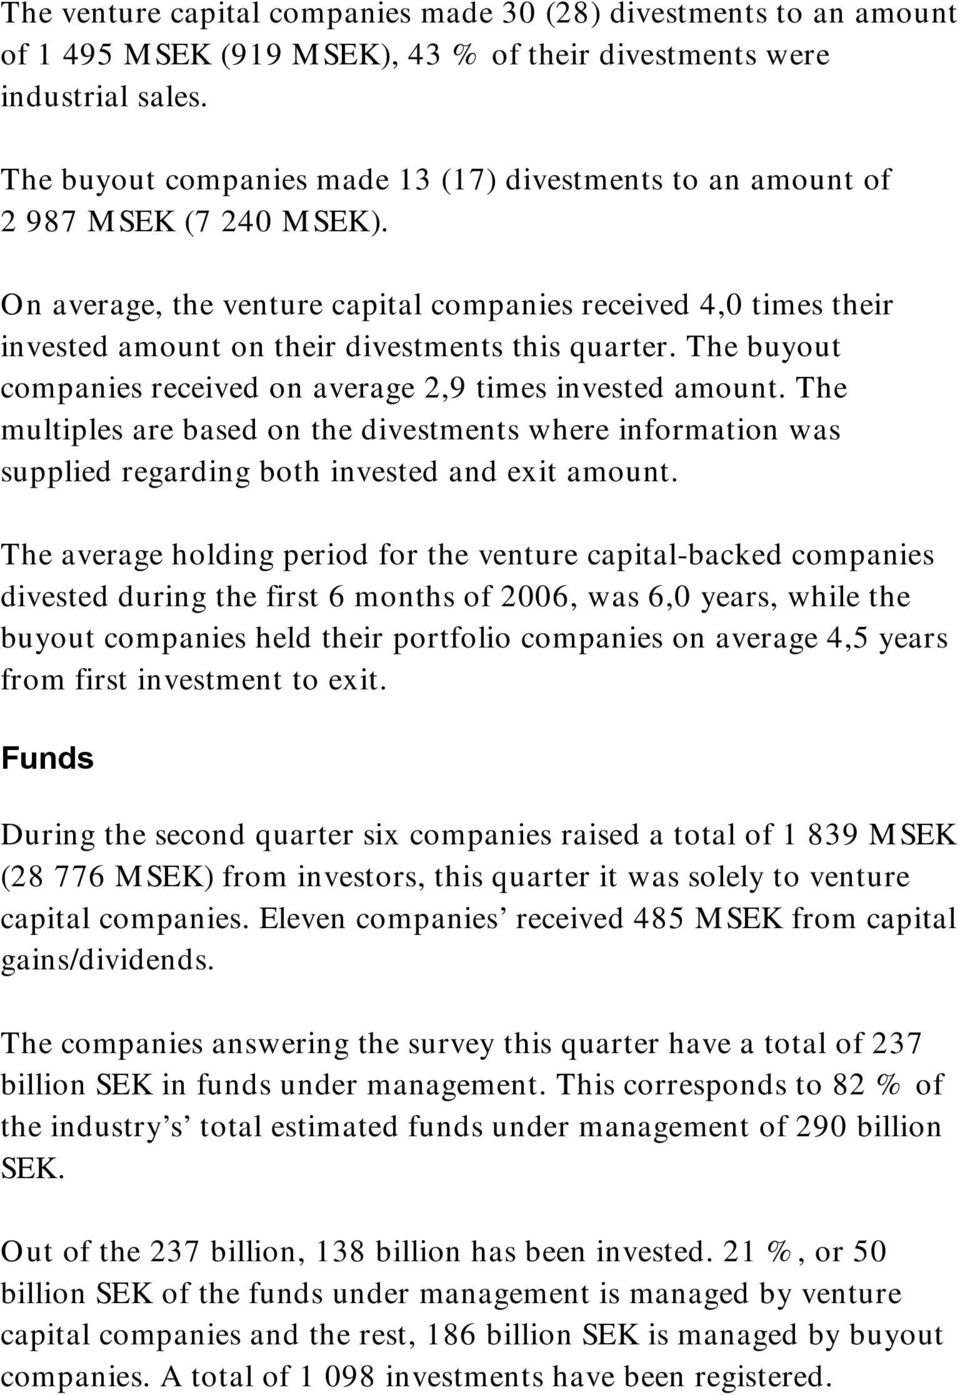 On average, the venture capital companies received 4,0 times their invested amount on their divestments this quarter. The buyout companies received on average 2,9 times invested amount.